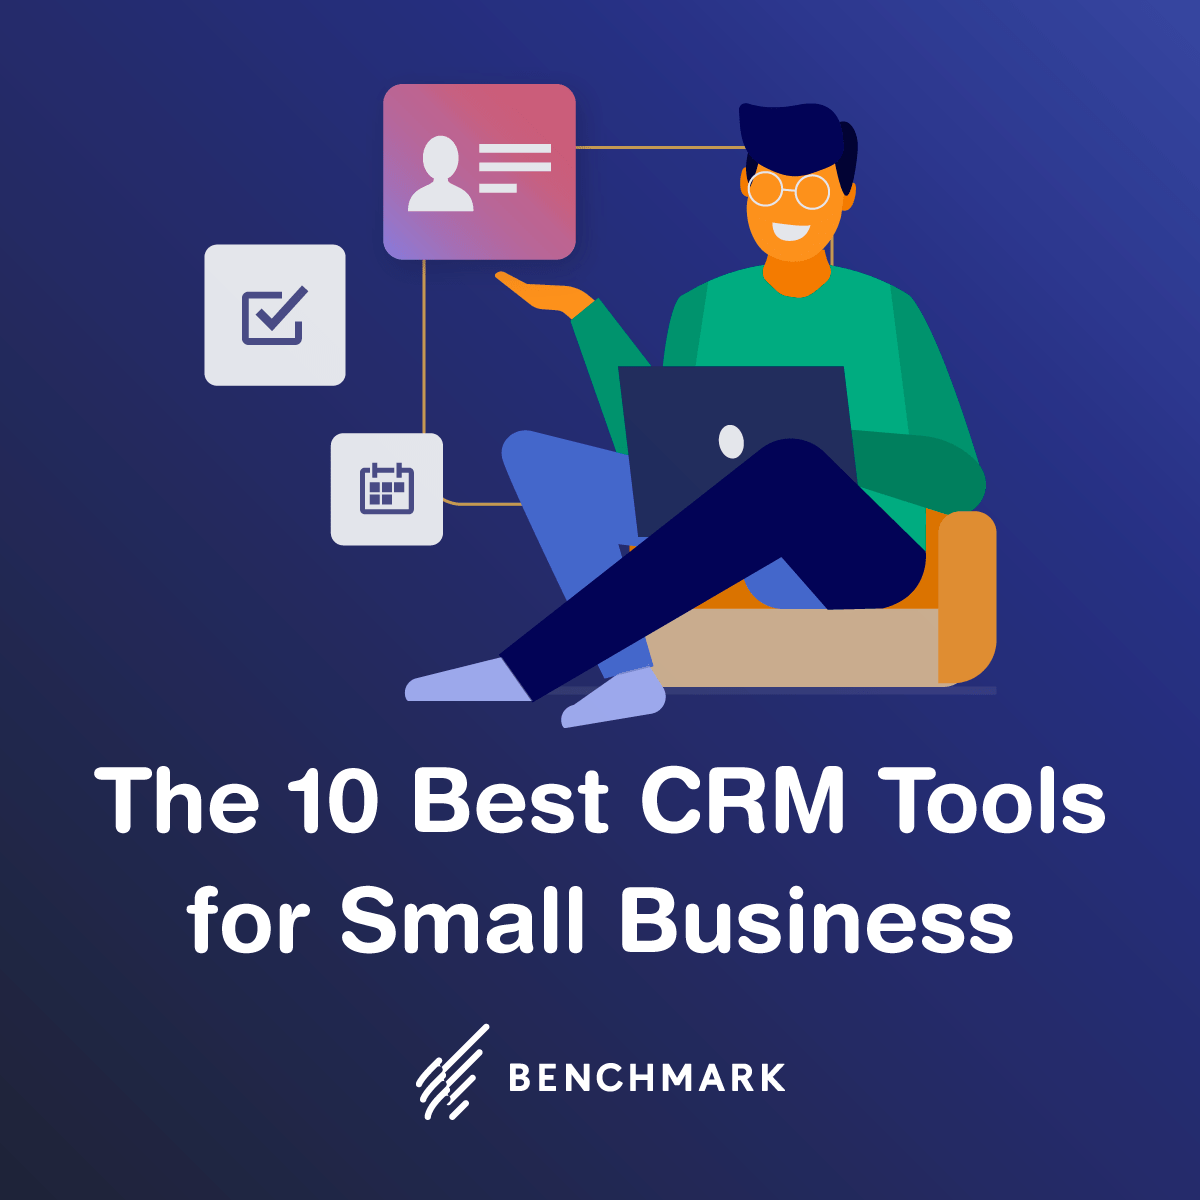 The 10 Best CRM Tools for Small Business Good To SEO